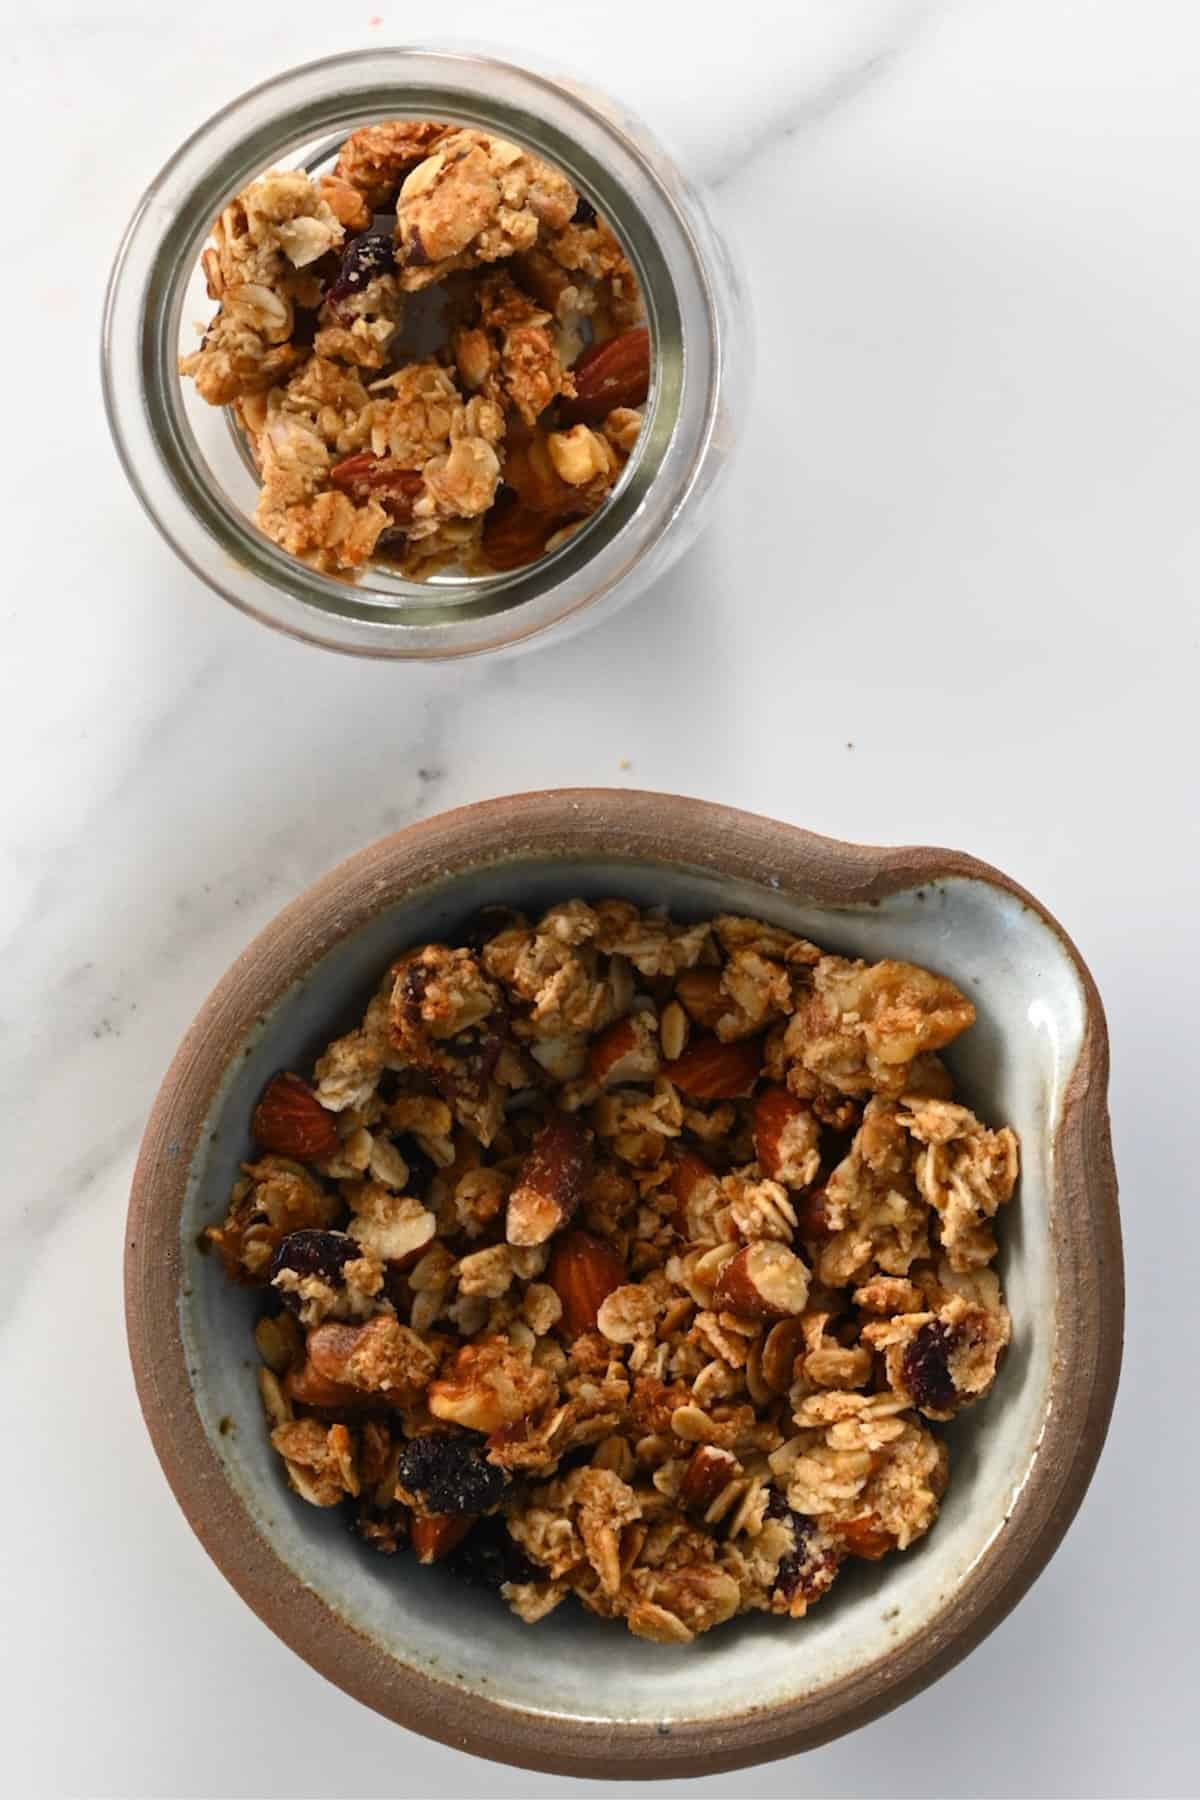 Healthy homemade granola in a bowl and in a small jar